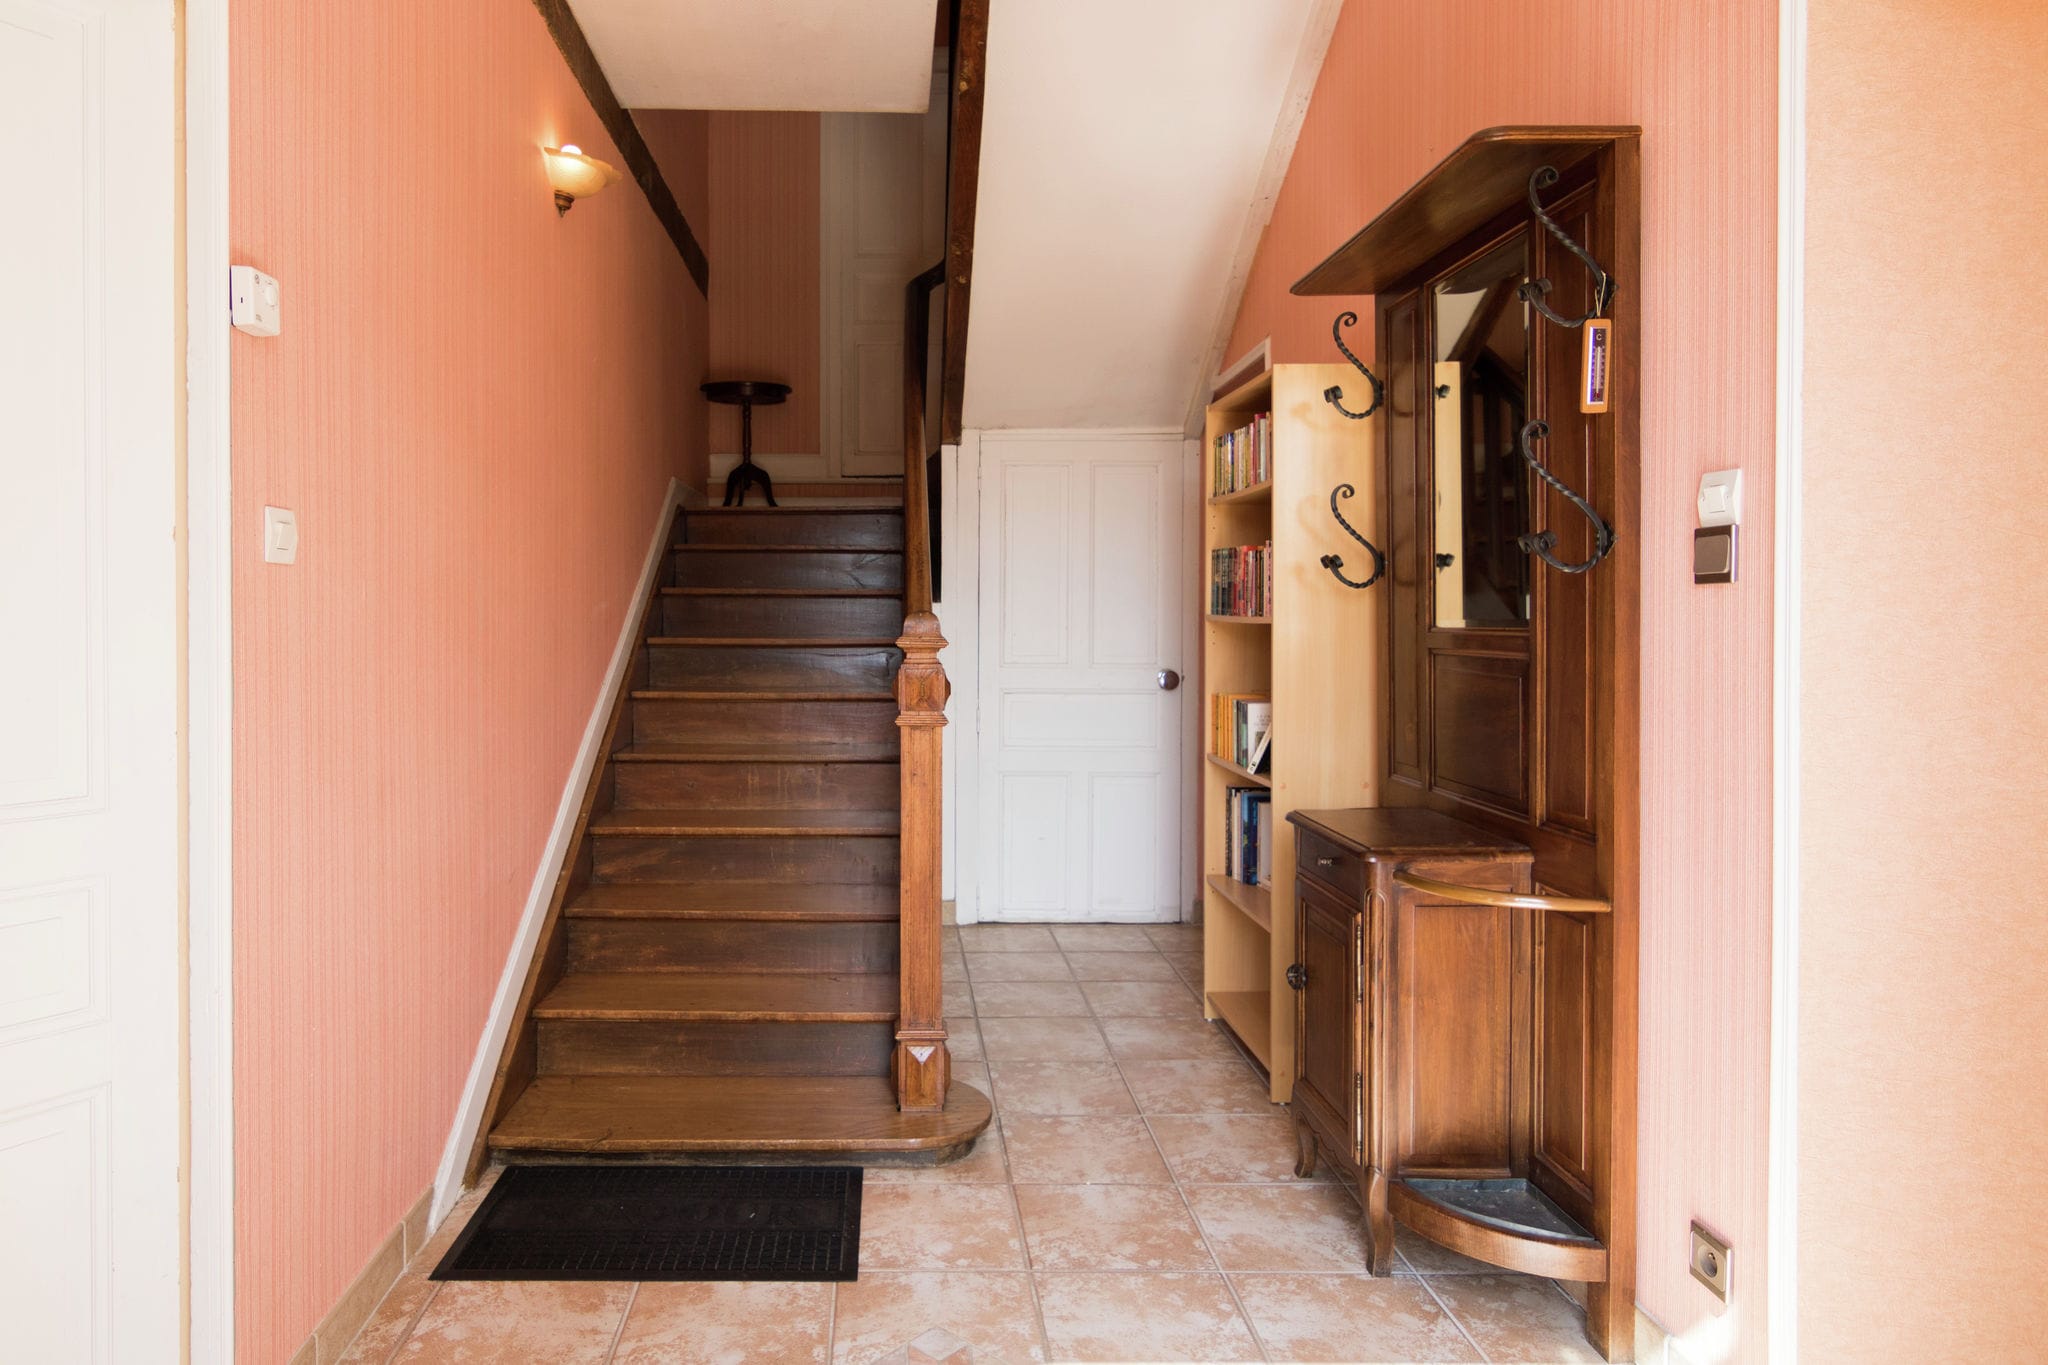 Magnificent holiday home with large garden close to Lac de Séchemailles.